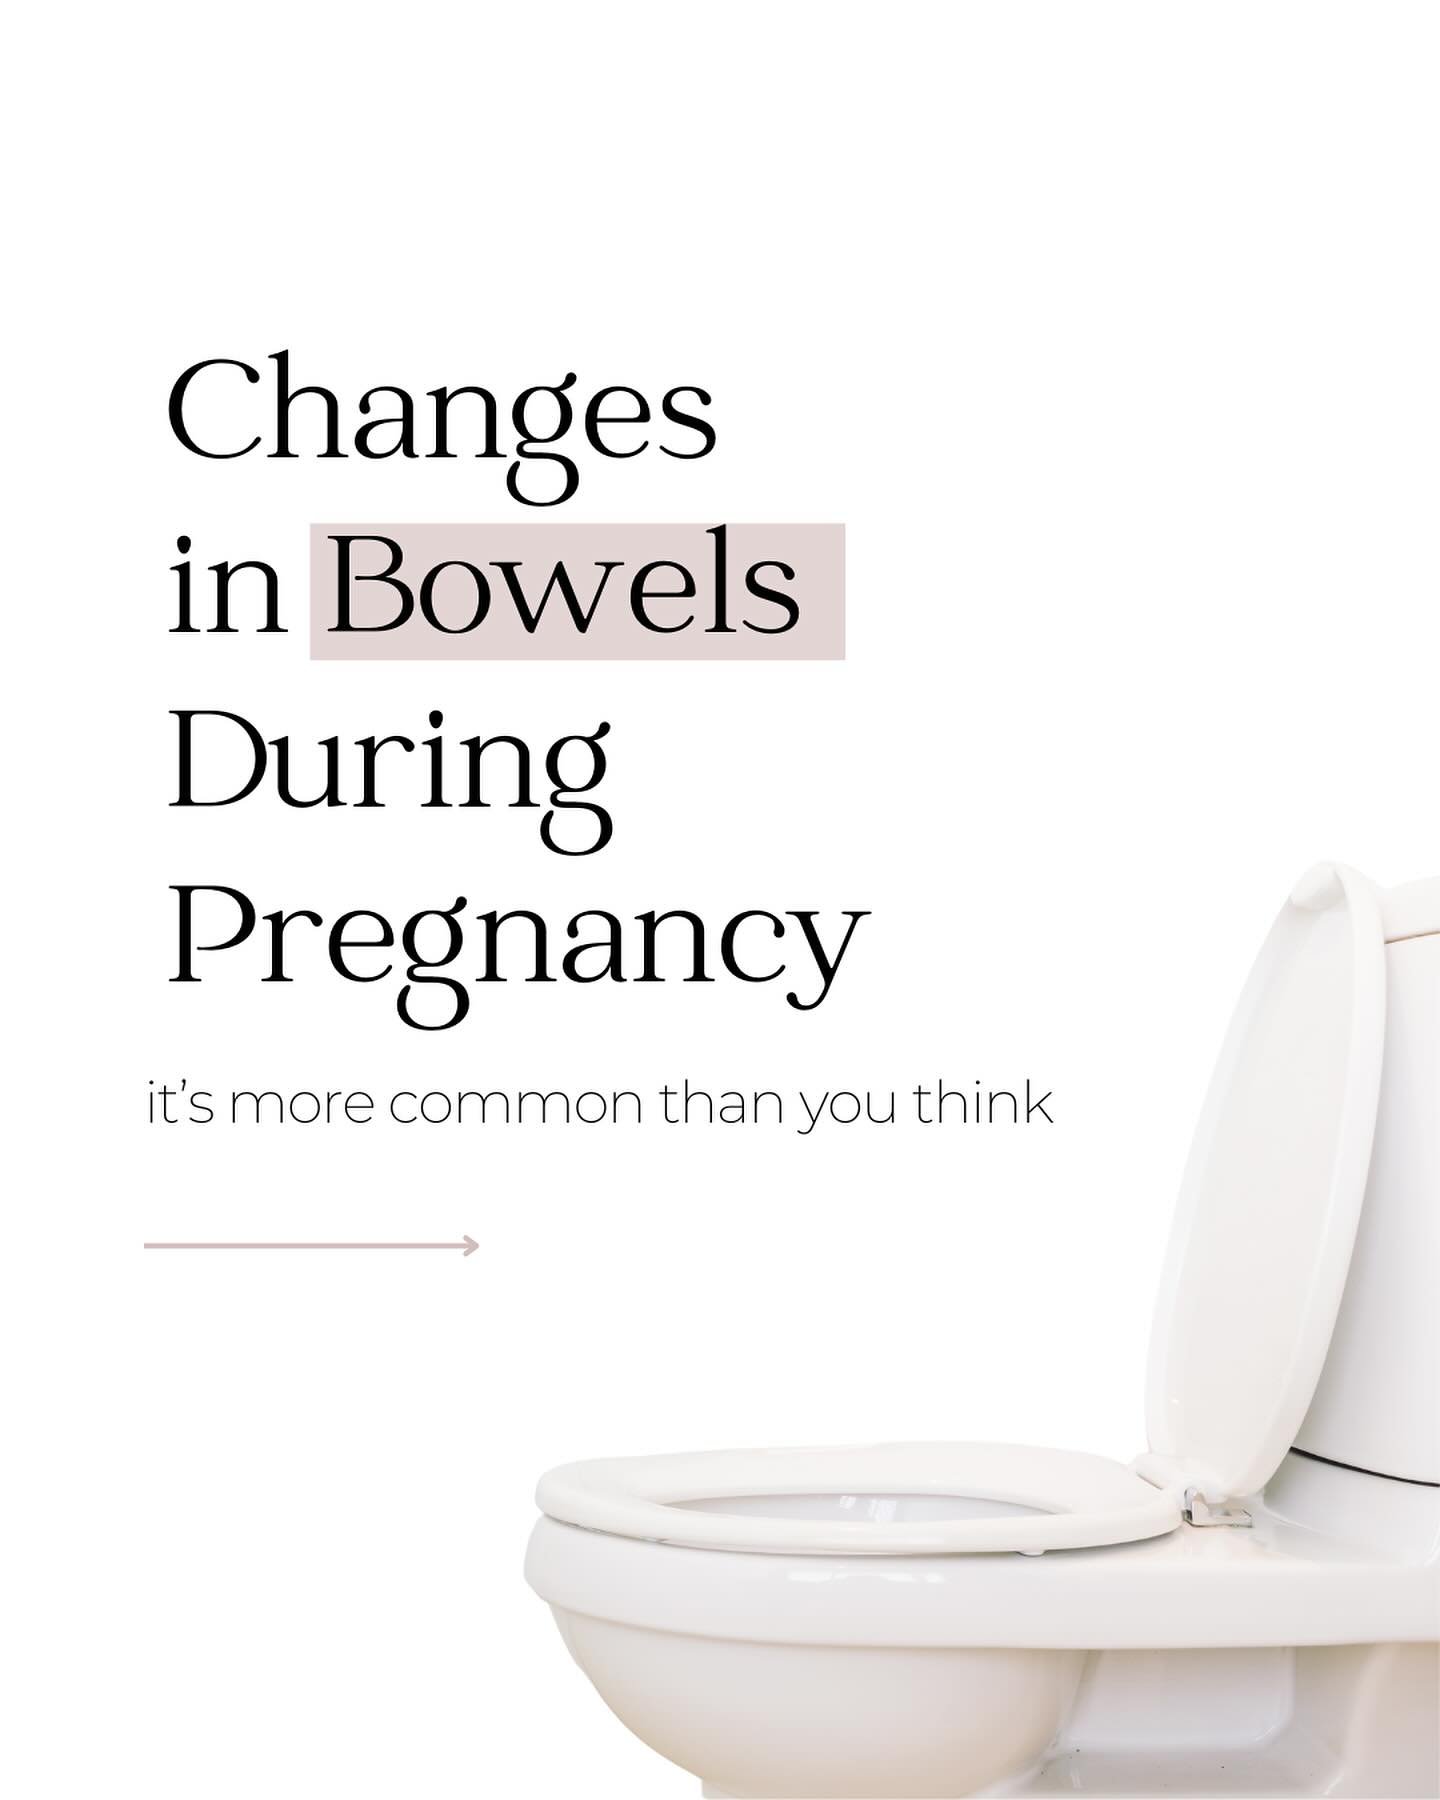 Heading into pregnancy, you expect the baby bump and the cravings, but the changes in bowel habits?&nbsp;

That&rsquo;s the surprise no one really talks about. 💩

During pregnancy, your body&rsquo;s hormone levels, especially progesterone, skyrocket